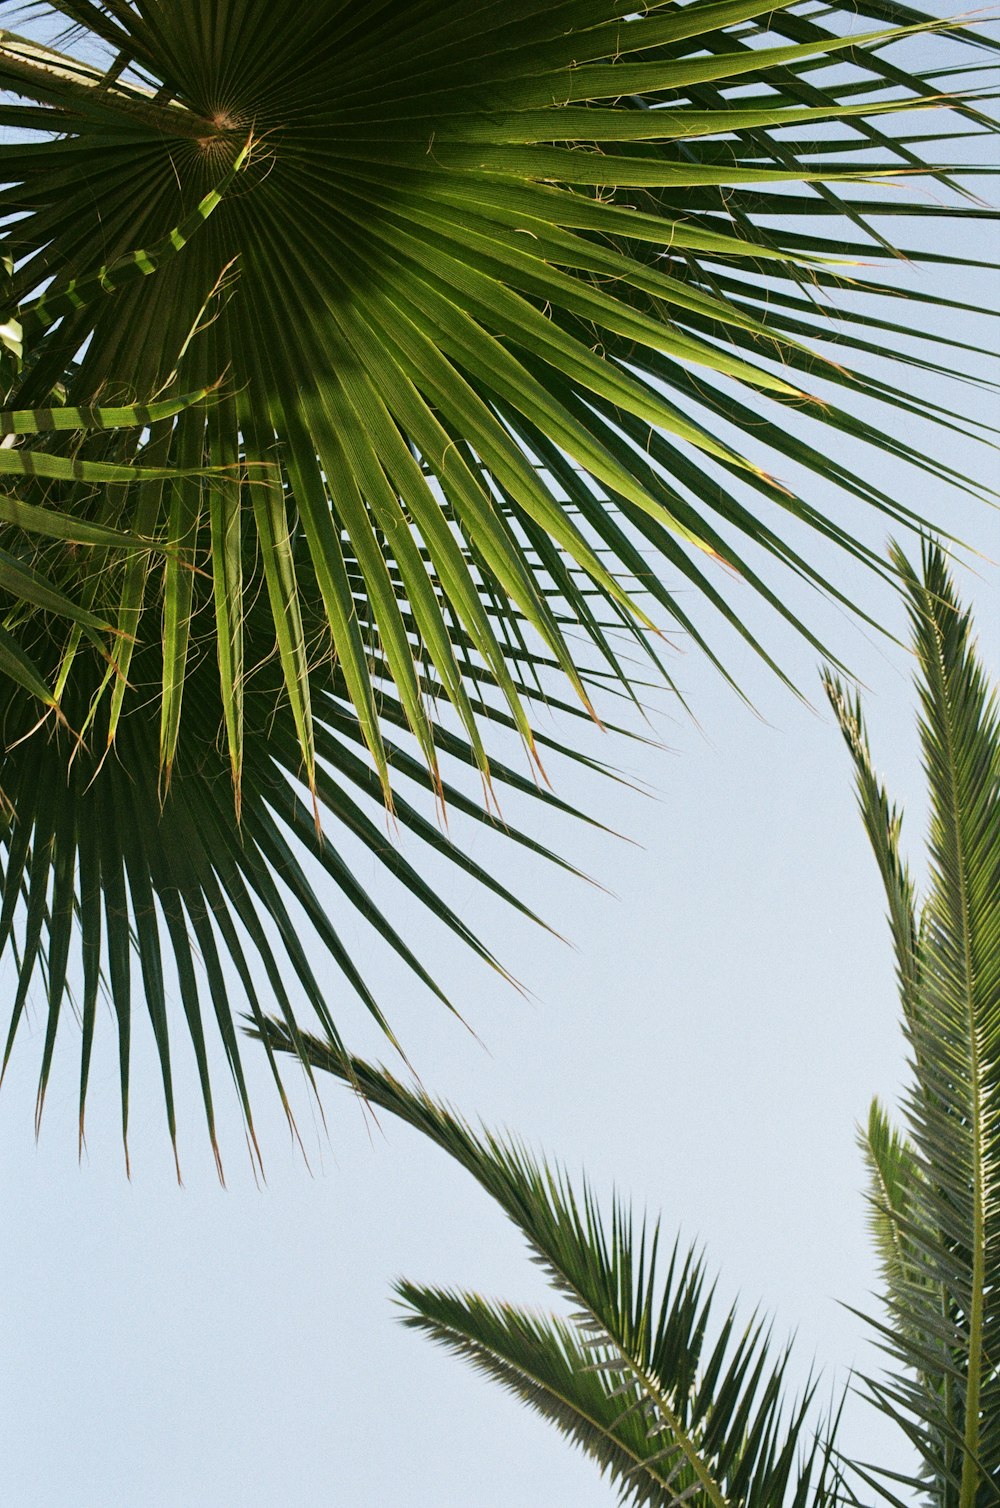 a bird perched on top of a palm tree